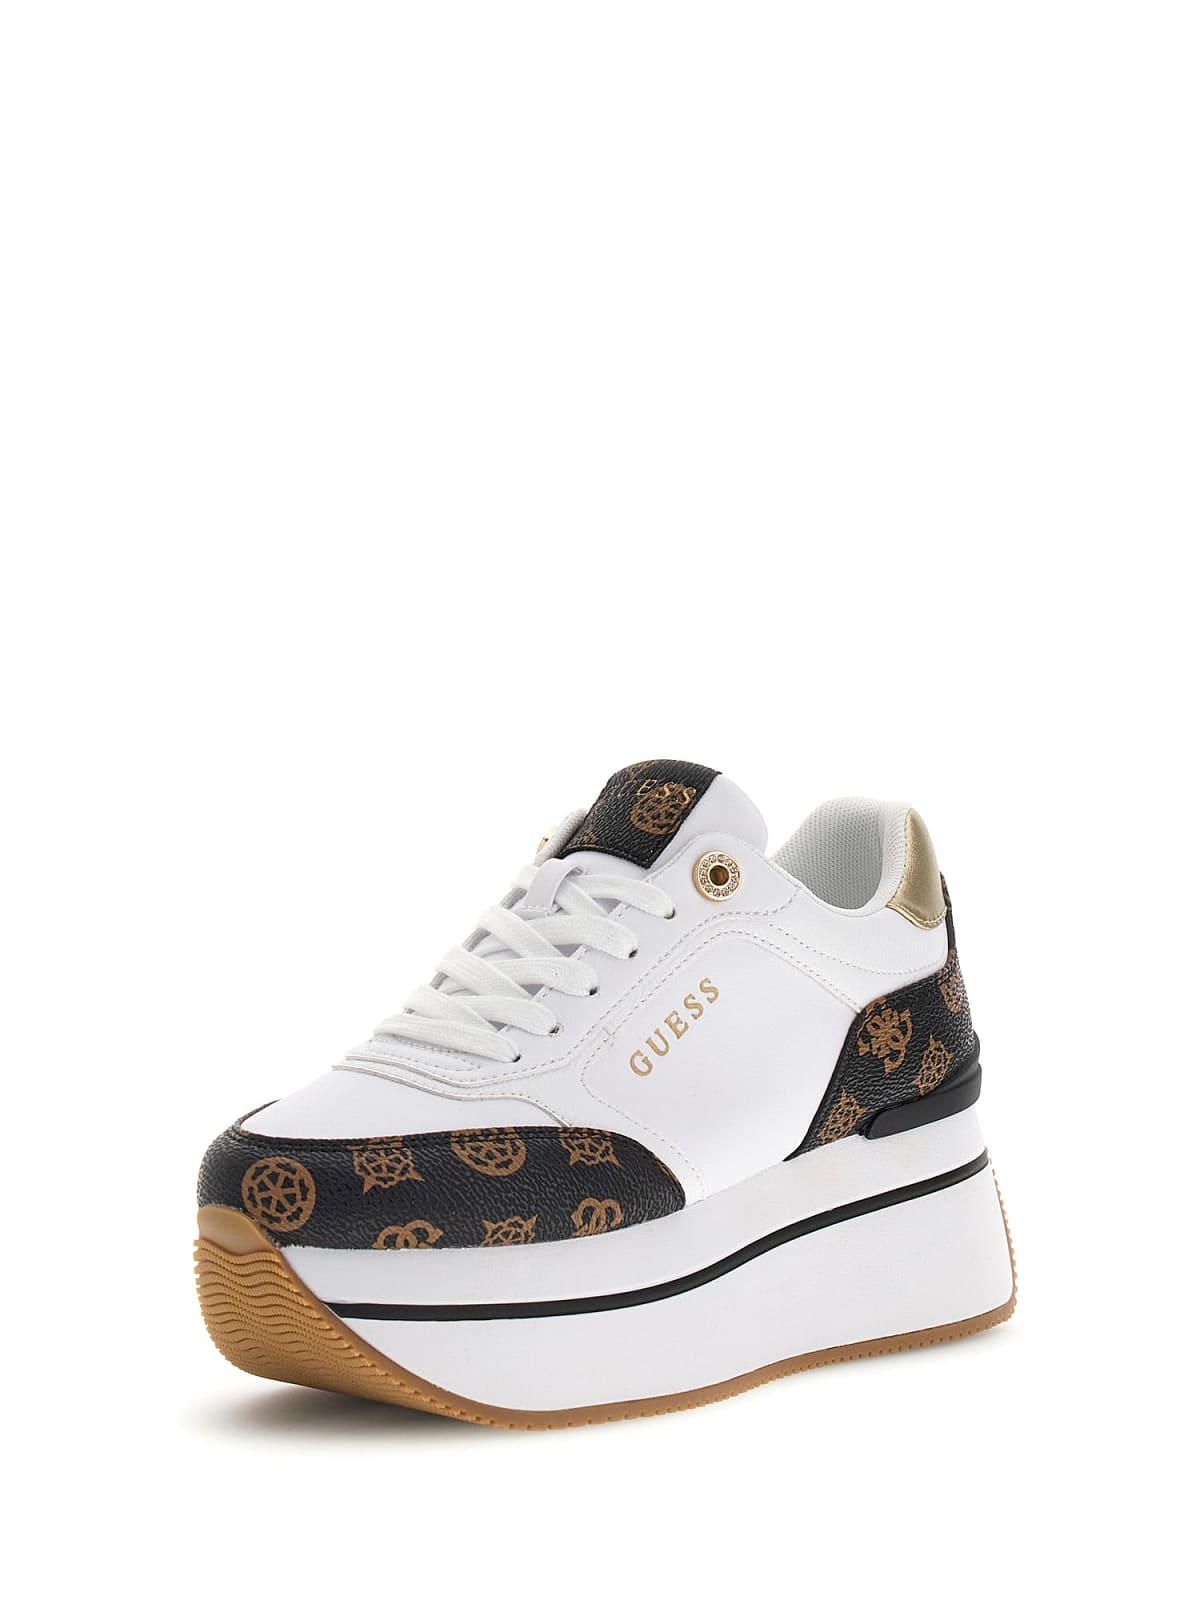 GUESS Sneakers Donna - Bianco